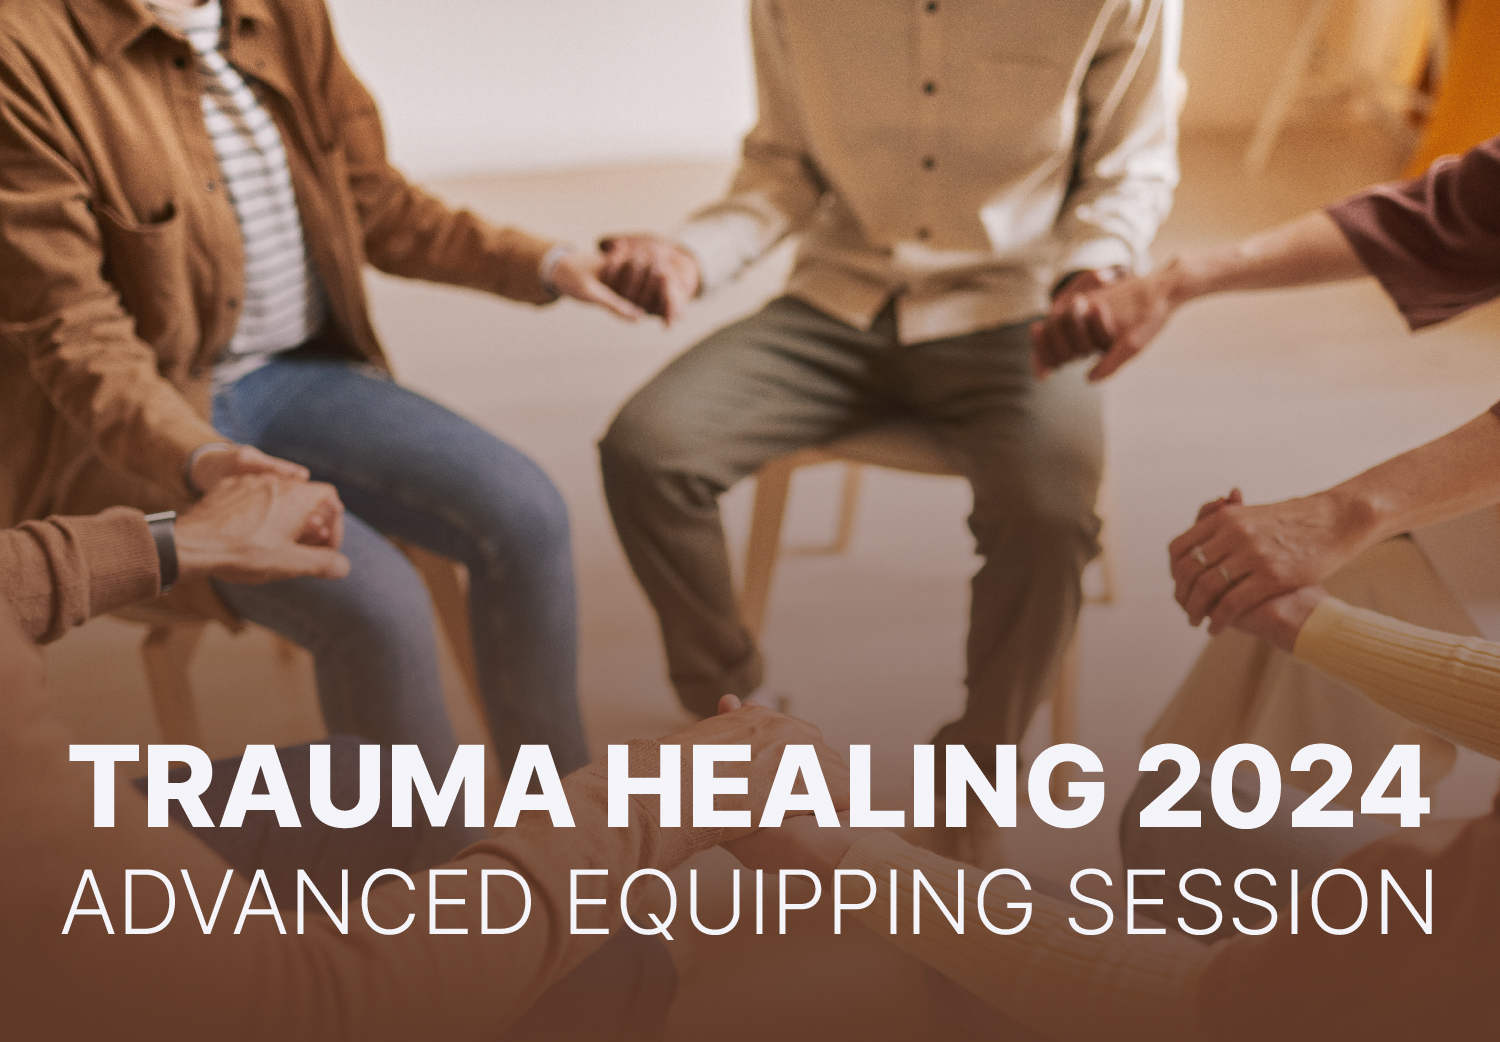 Trauma Healing - Advanced Equipping Session